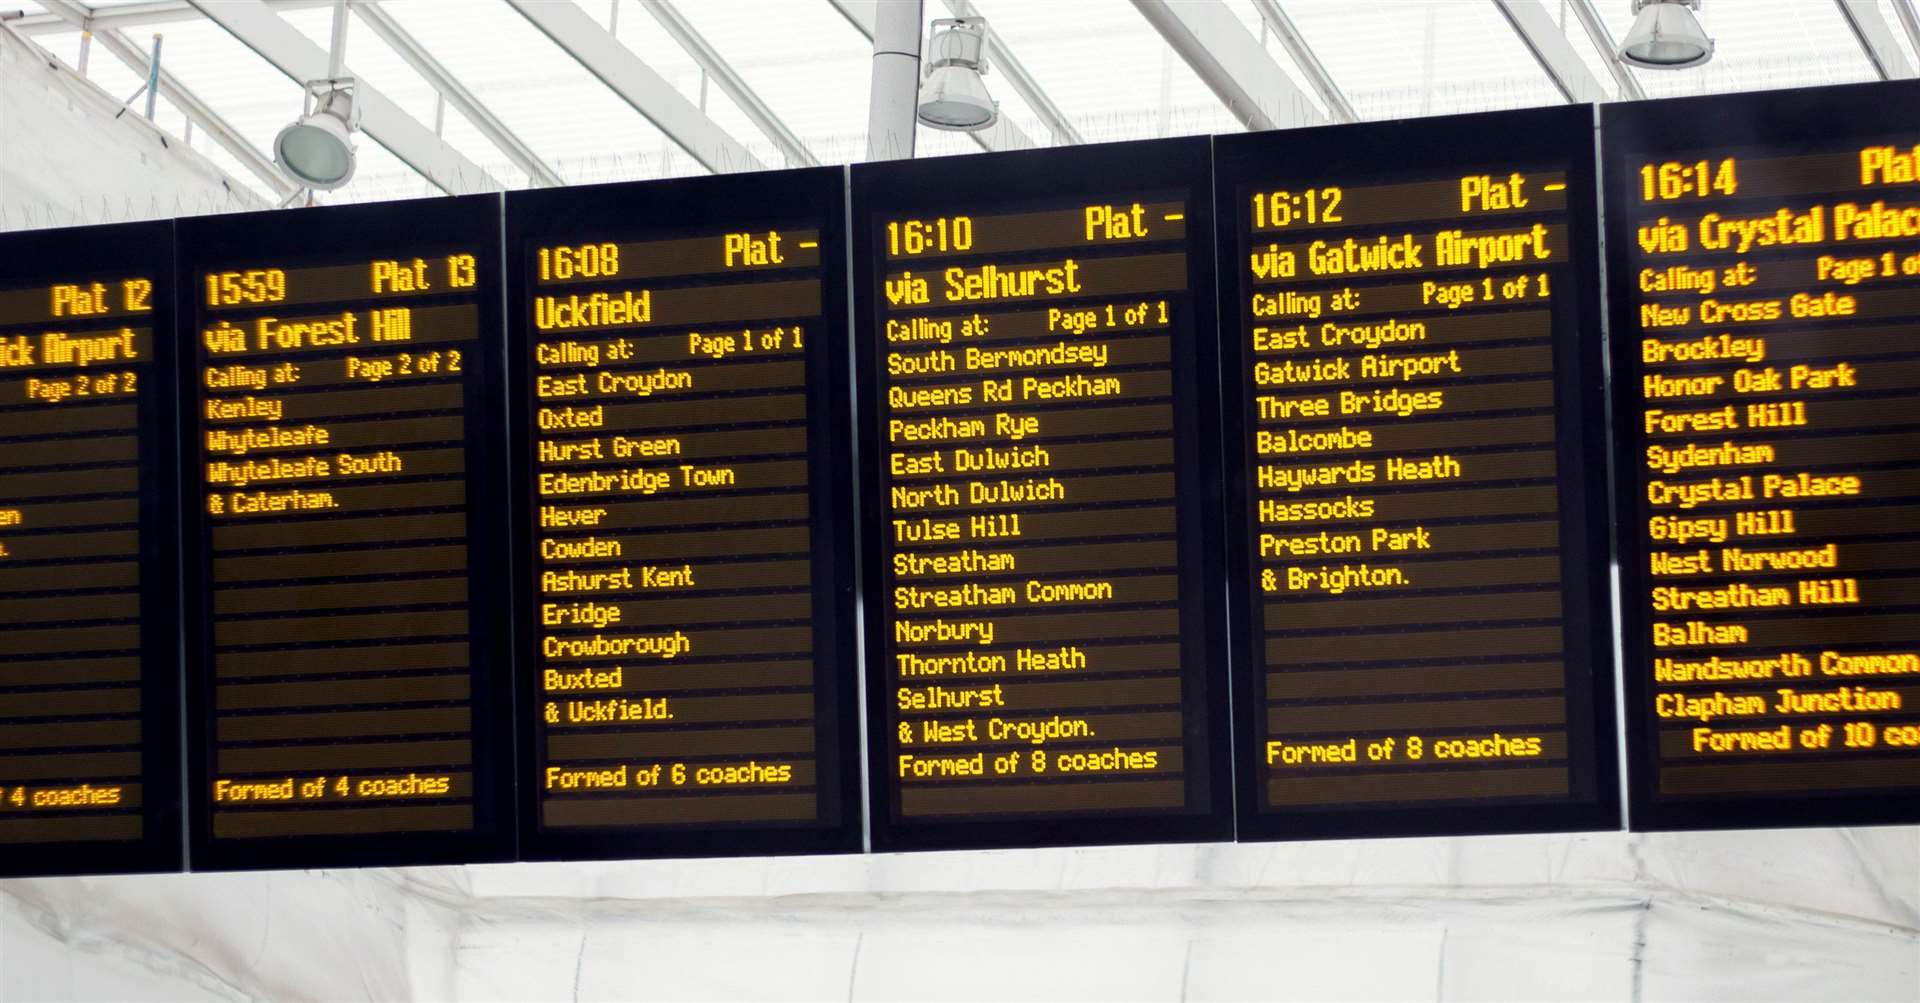 Passengers are being told to use journey planners and expect delays. Image: iStock.